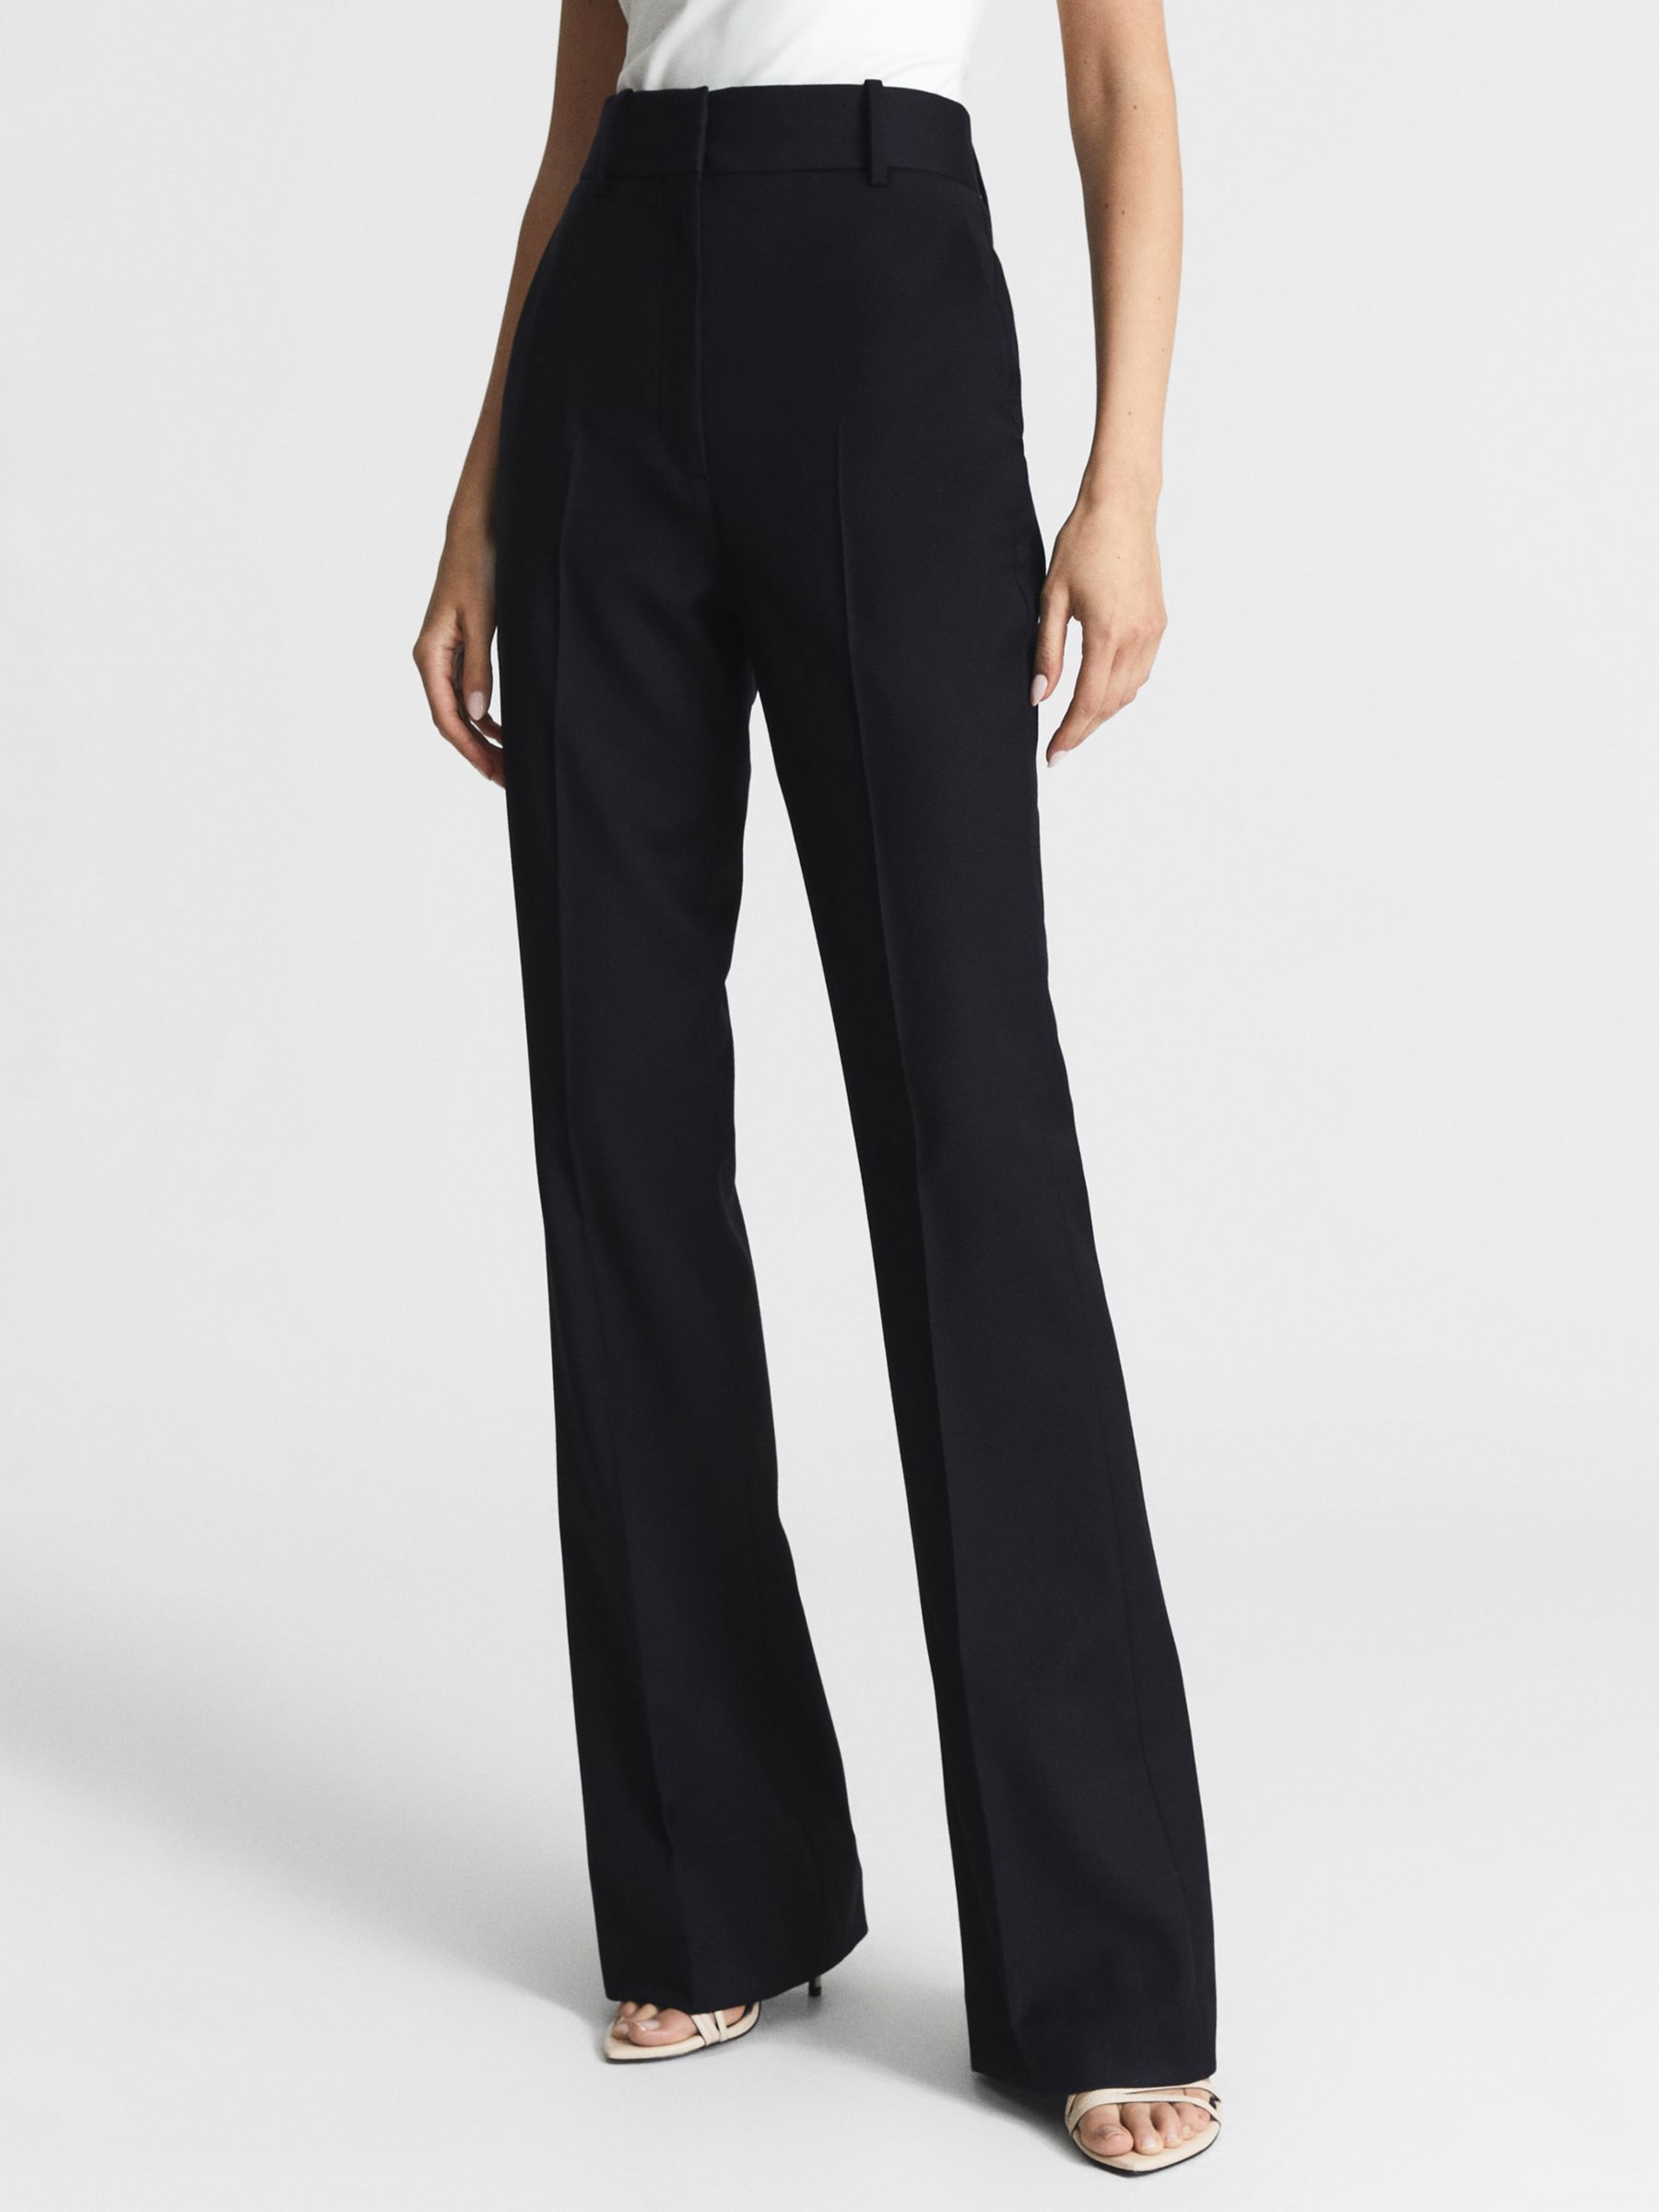 Reiss Haisley Tailored Flare Trousers, Navy at John Lewis & Partners